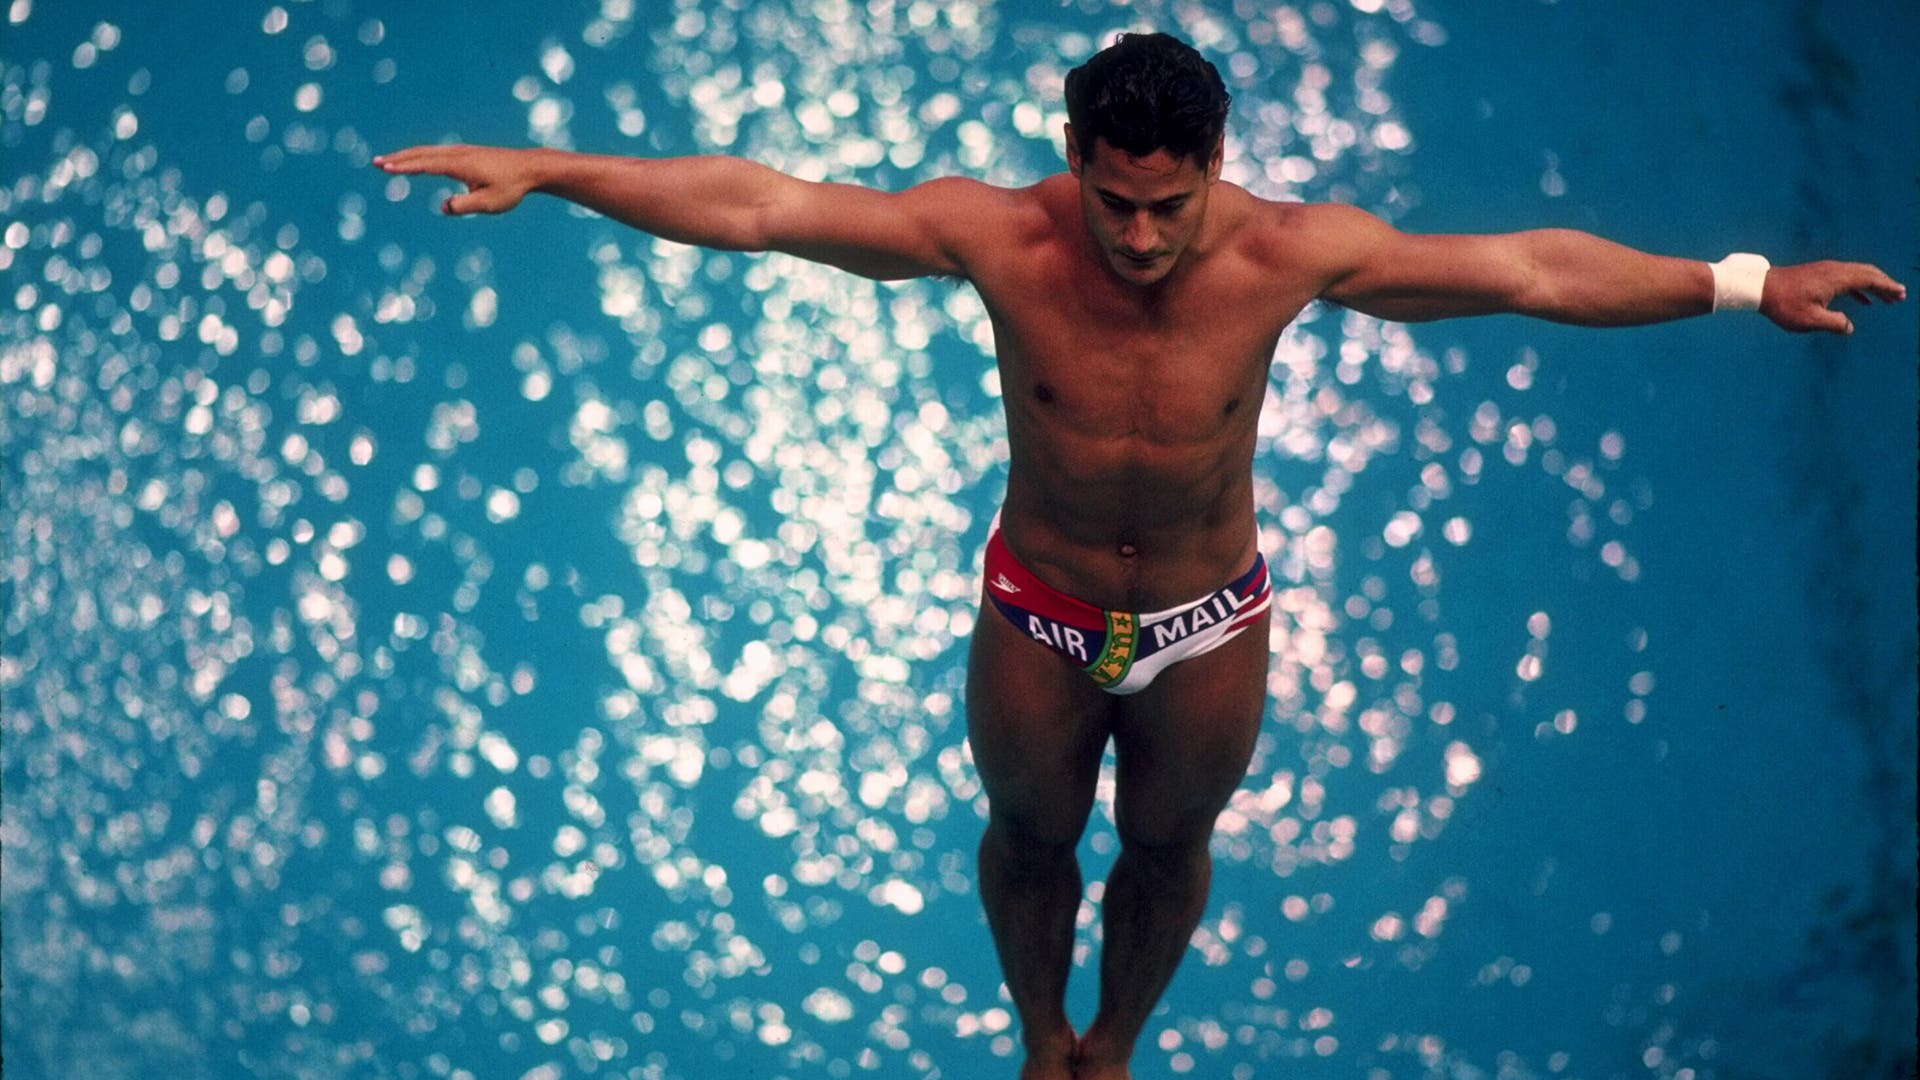 Greg Louganis of the USA sets his feet on the edge of the diving board before attempting a dive in the men's spring board competition during the 1988 Summer Olympic Games held in Seoul, South Korea.